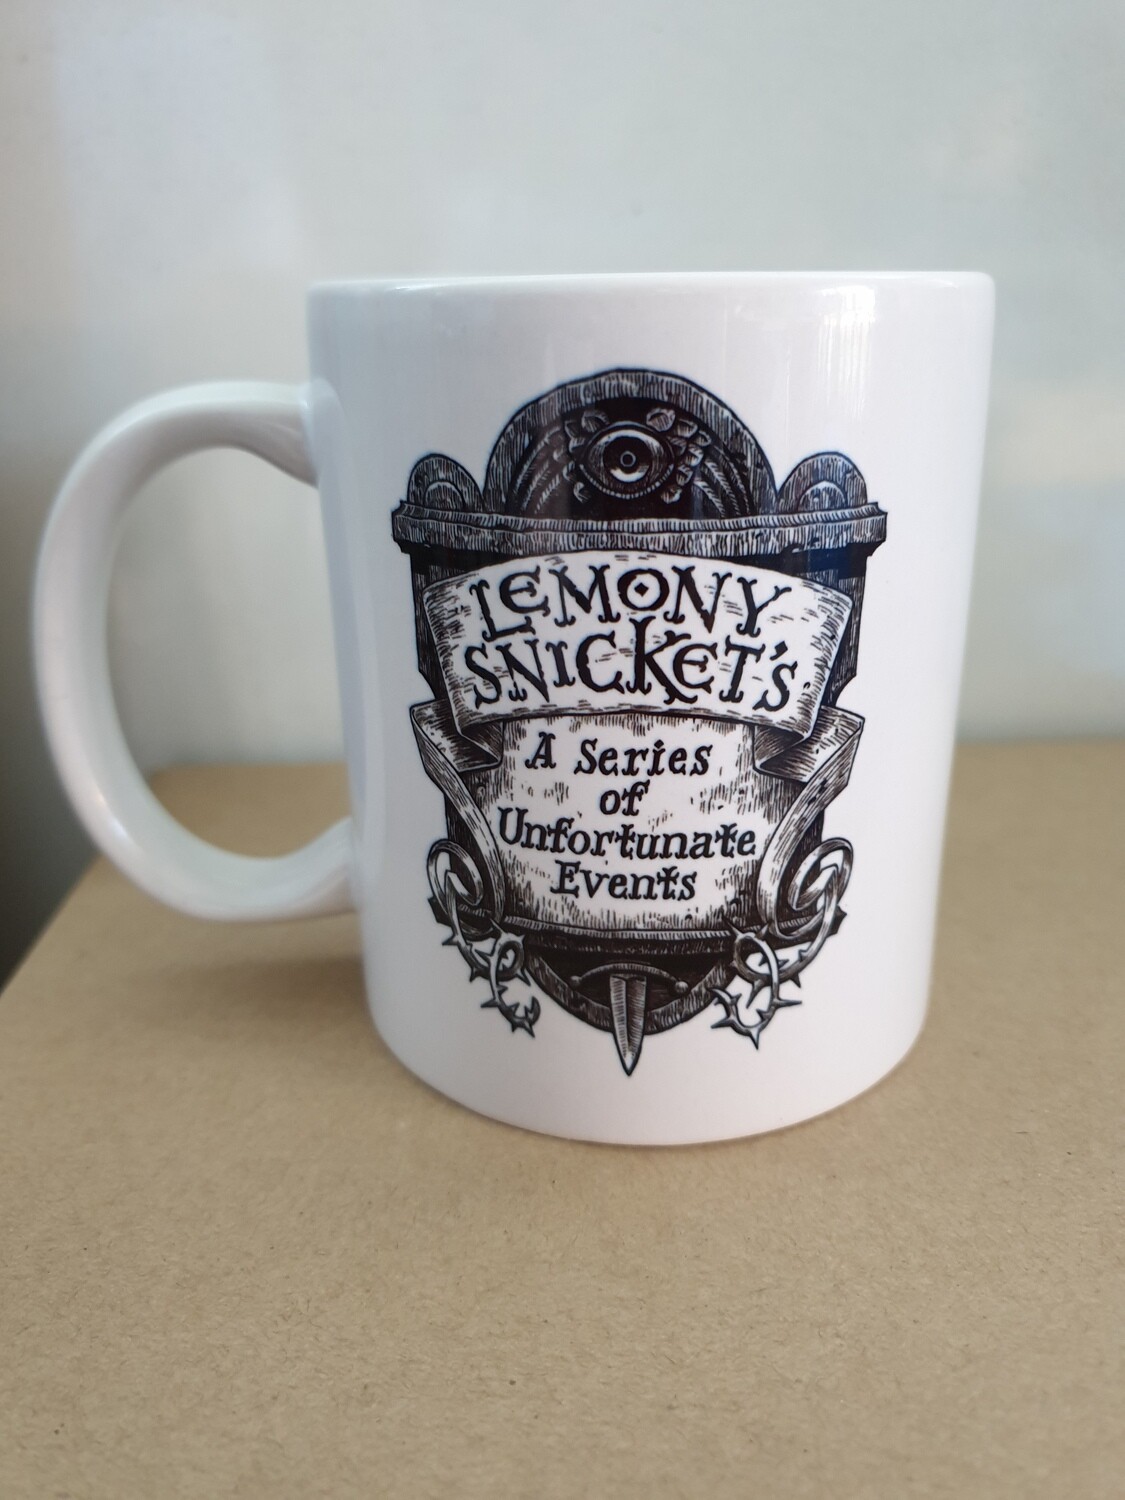 Lemony Snicket's I will love you Quote Mug